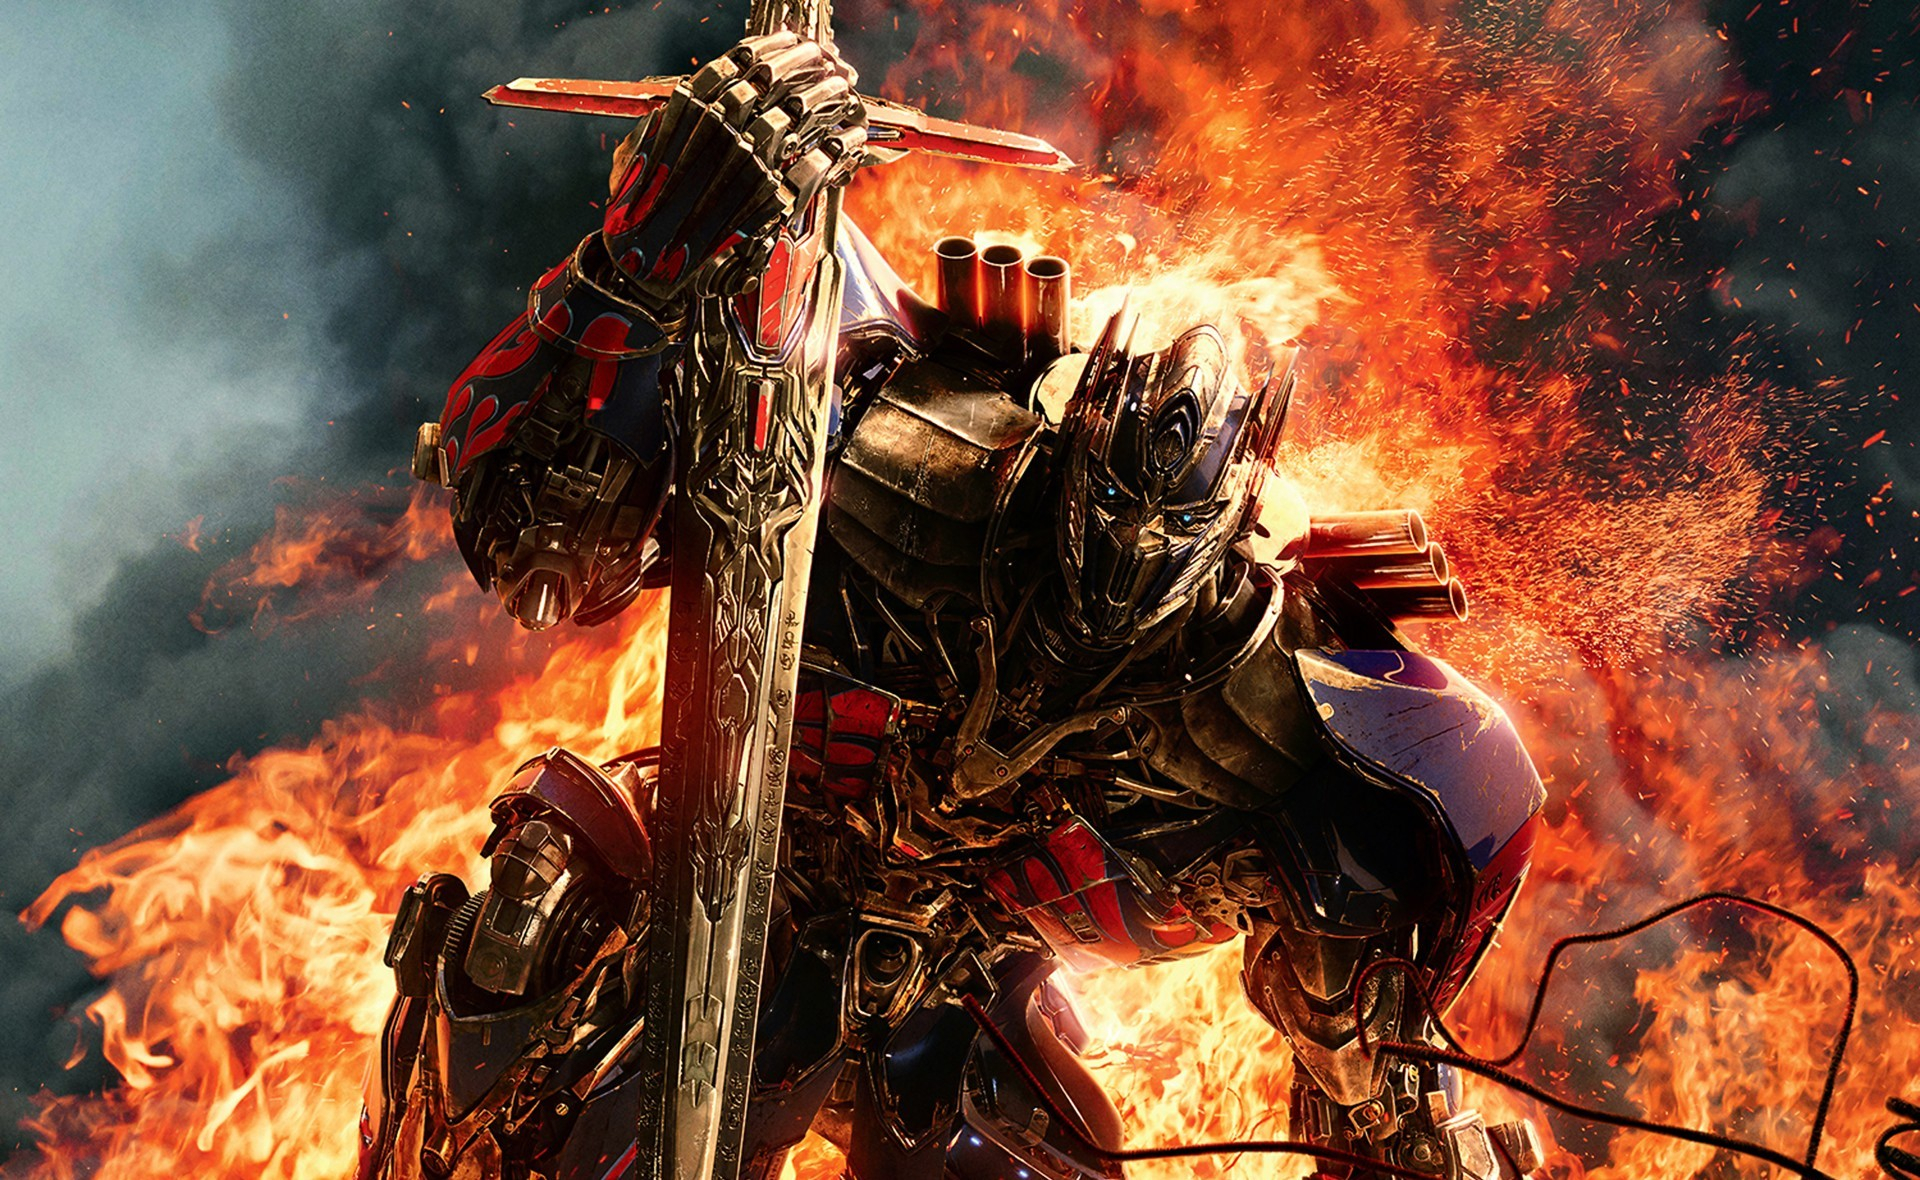 1920x1180 450+ Transformers HD Wallpapers and Backgrounds